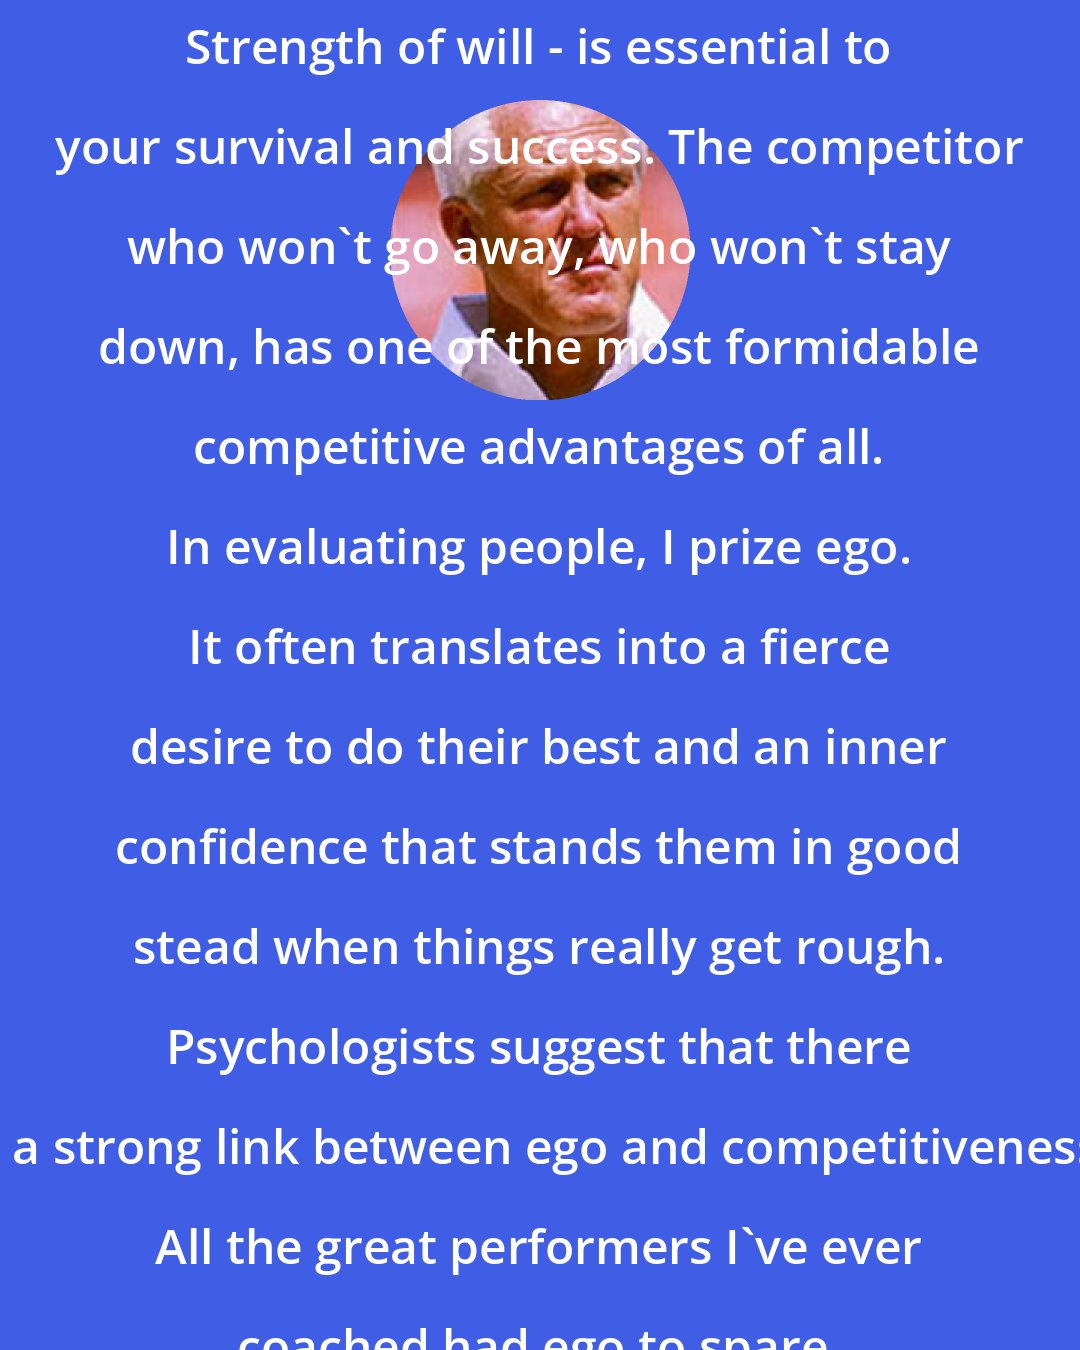 Bill Walsh: Strength of will - is essential to your survival and success. The competitor who won't go away, who won't stay down, has one of the most formidable competitive advantages of all. In evaluating people, I prize ego. It often translates into a fierce desire to do their best and an inner confidence that stands them in good stead when things really get rough. Psychologists suggest that there is a strong link between ego and competitiveness. All the great performers I've ever coached had ego to spare.